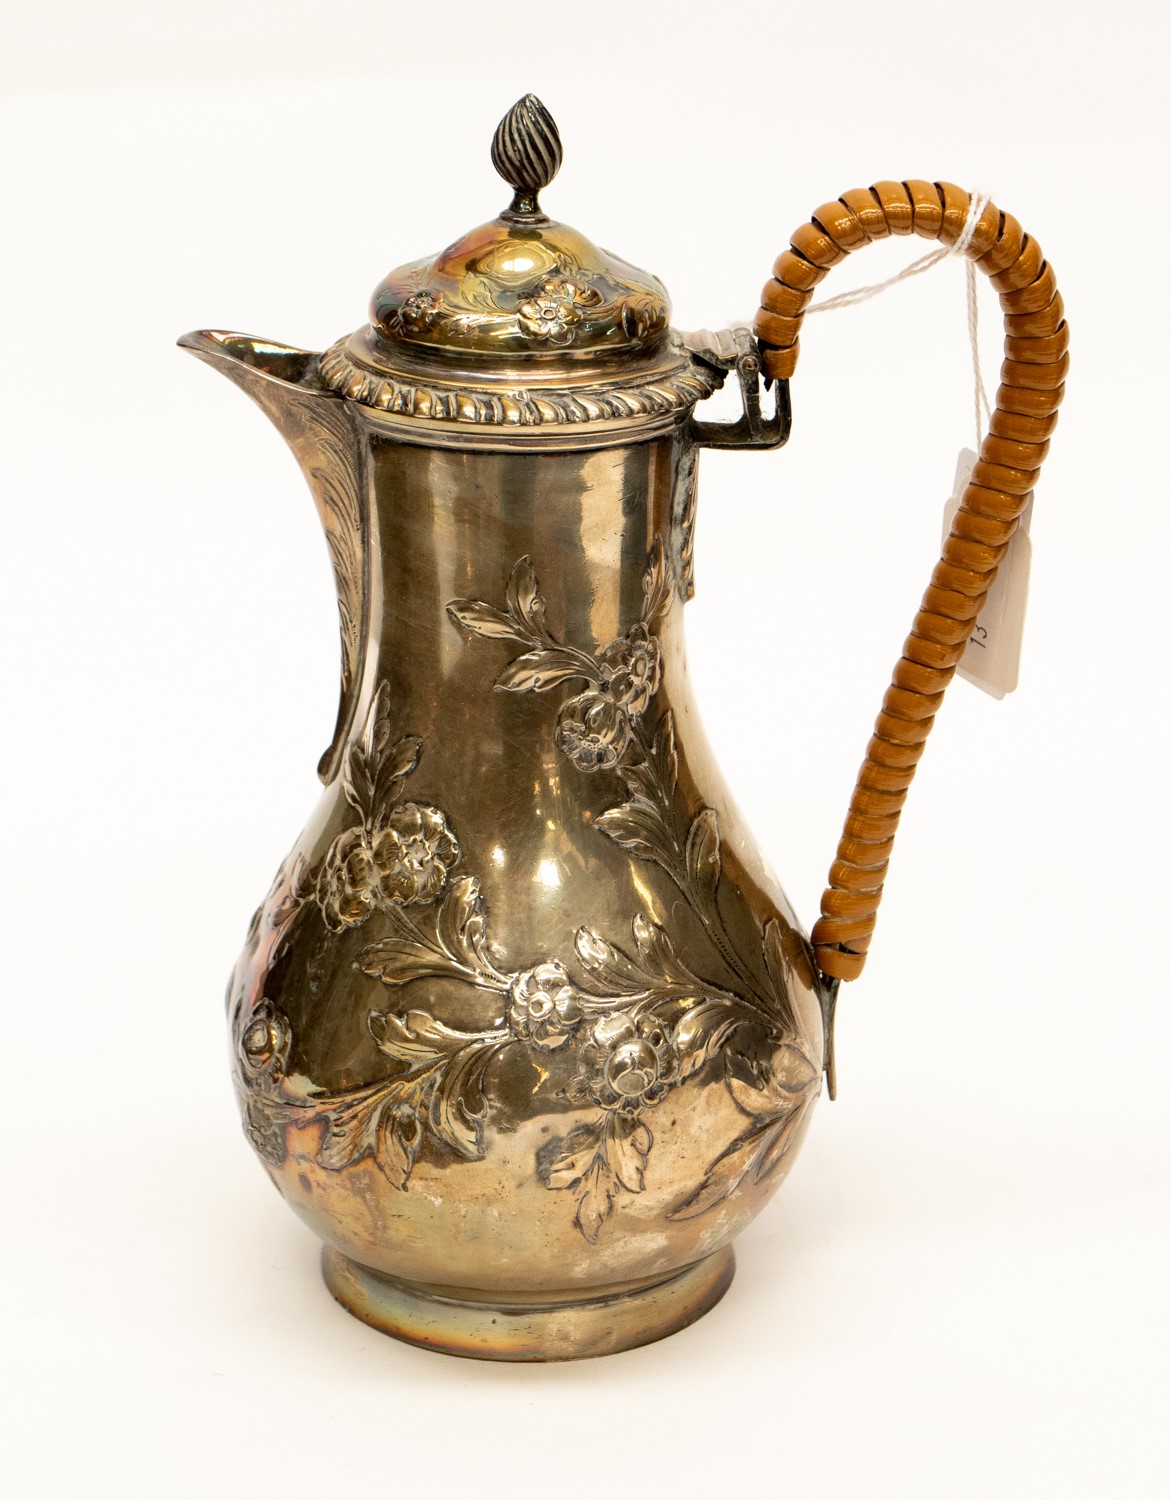 A silver hot water/milk jug with bound handle, repouse rose and leaf design, gross 14.